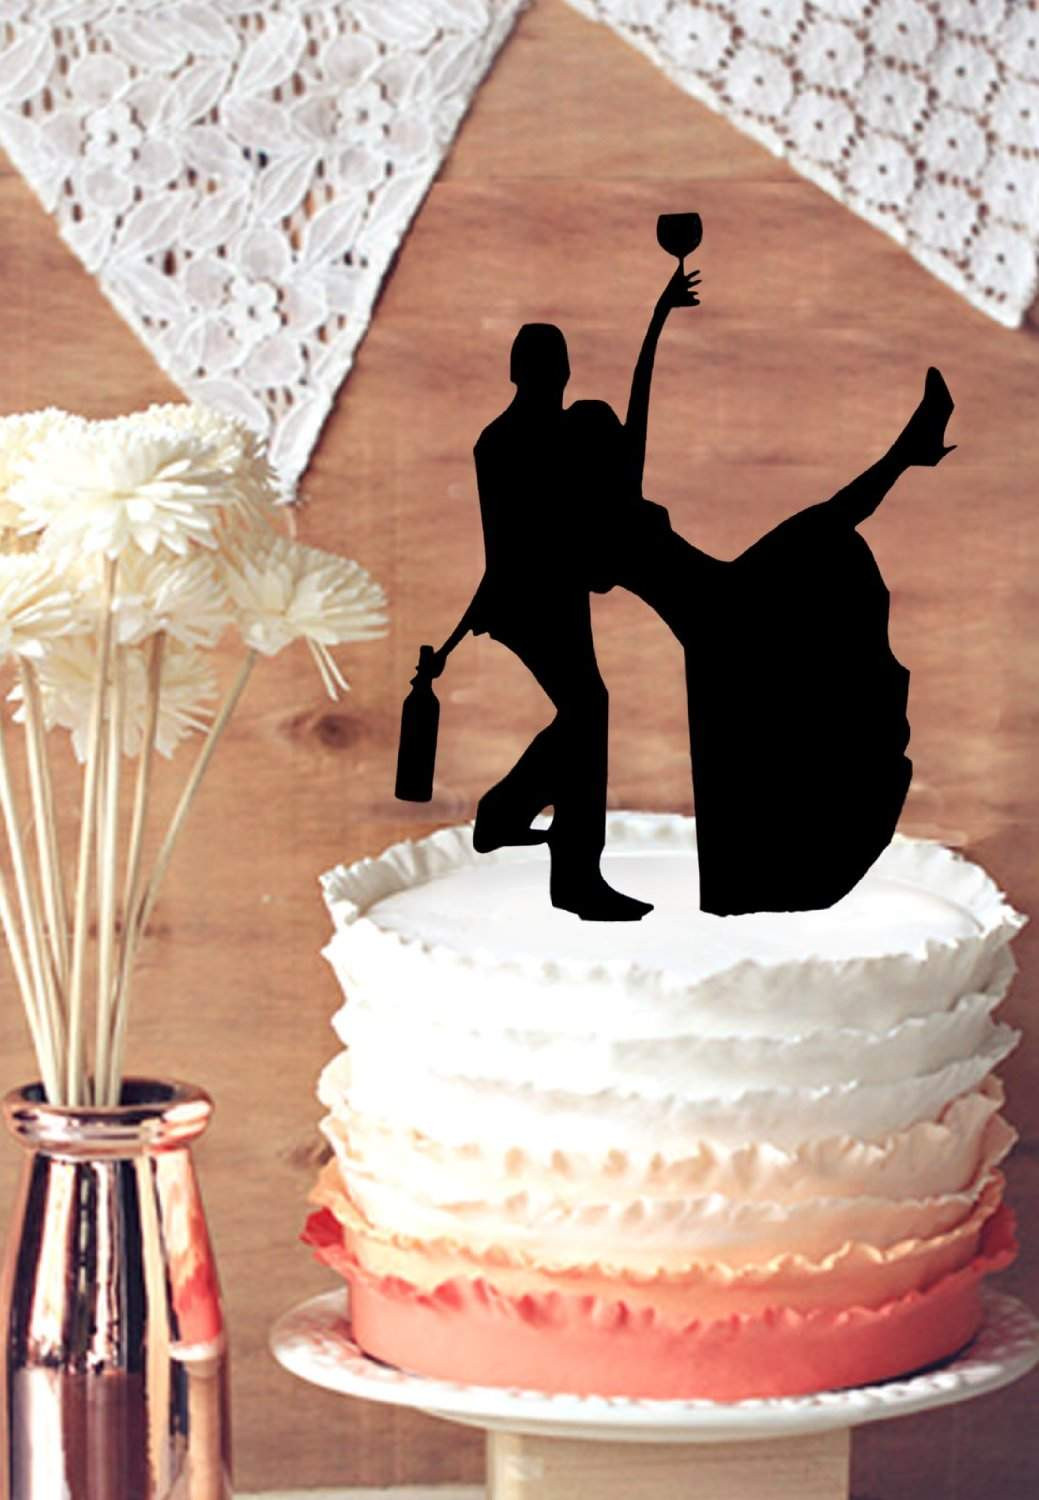 Custom Made Wedding Cake Toppers
 Top 10 Best Funny Wedding Cake Toppers